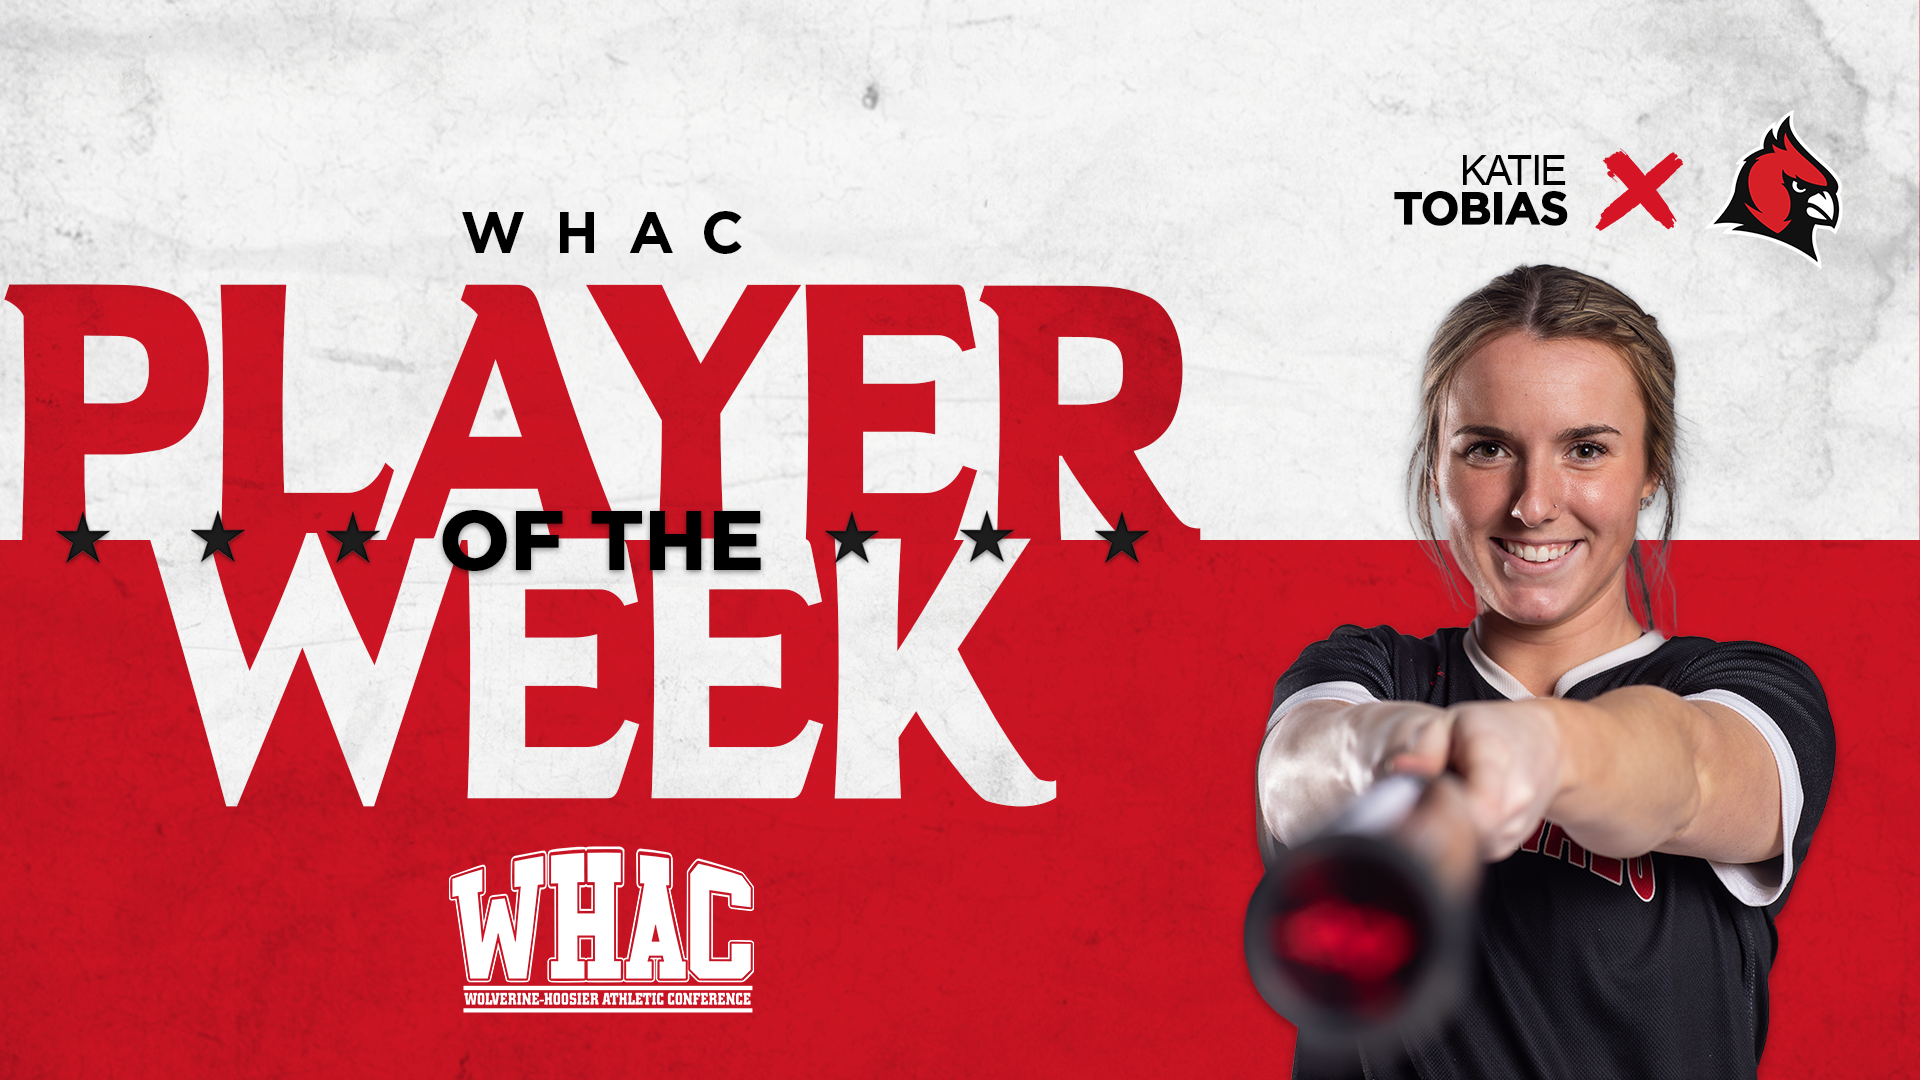 Tobias earns WHAC and NCCAA Player of the Week honors